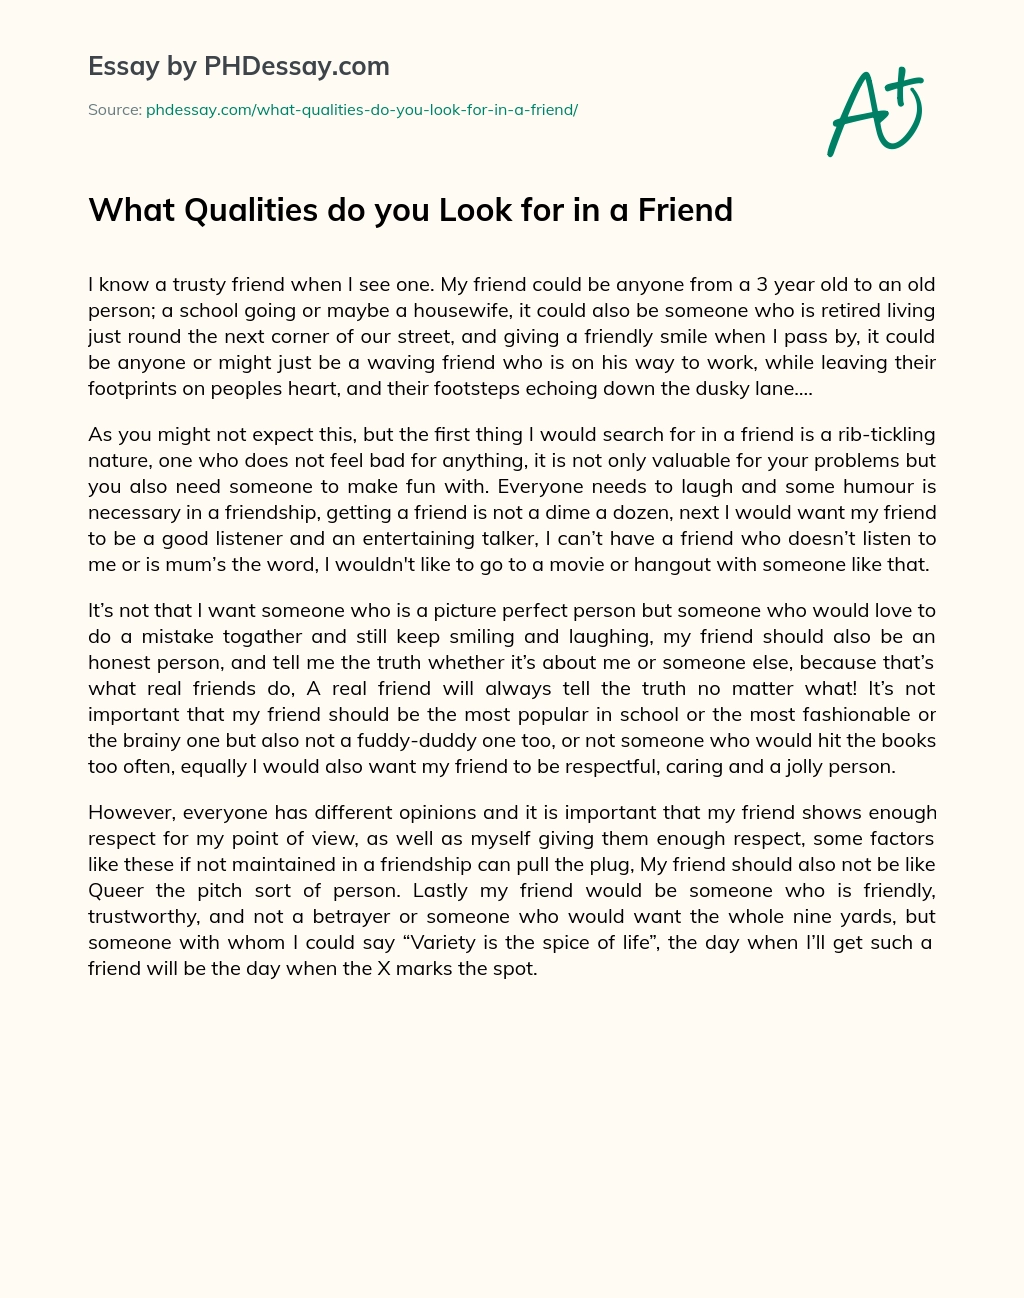 What Qualities do you Look for in a Friend essay